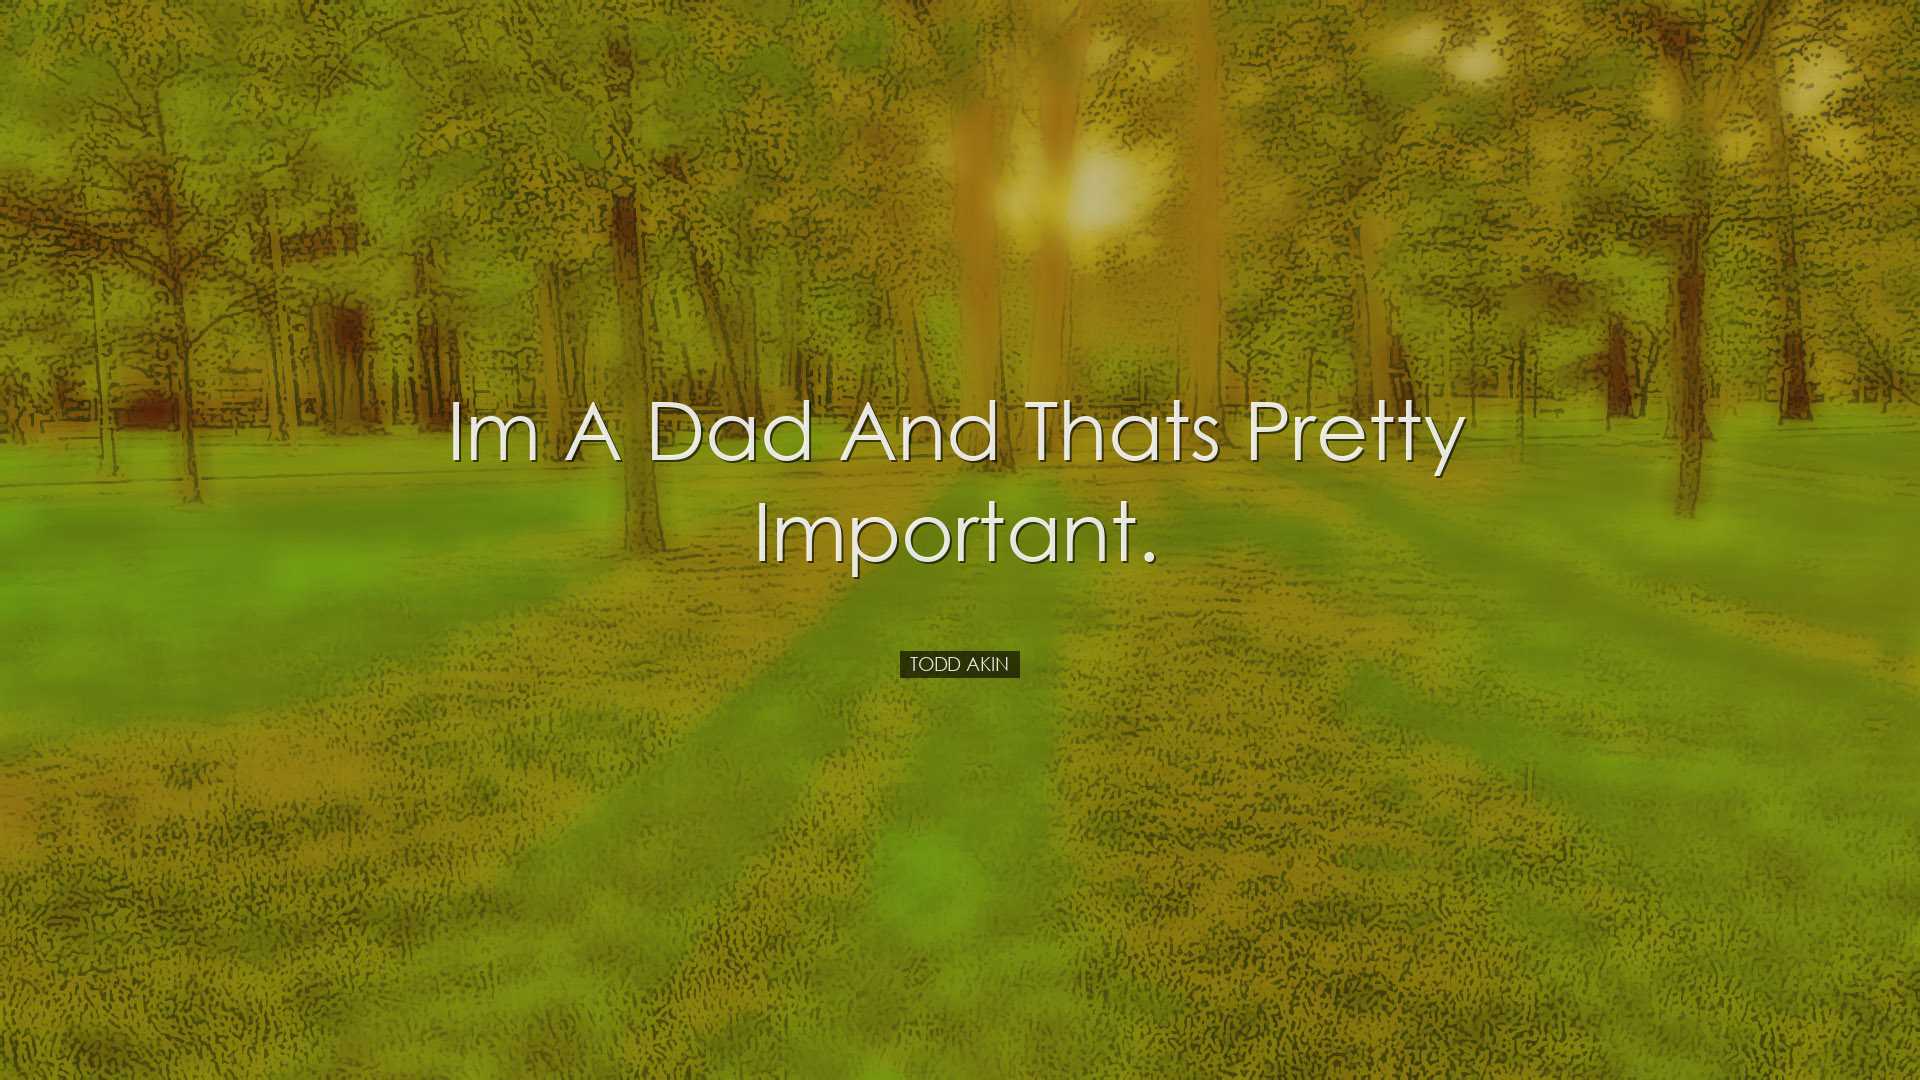 Im a dad and thats pretty important. - Todd Akin